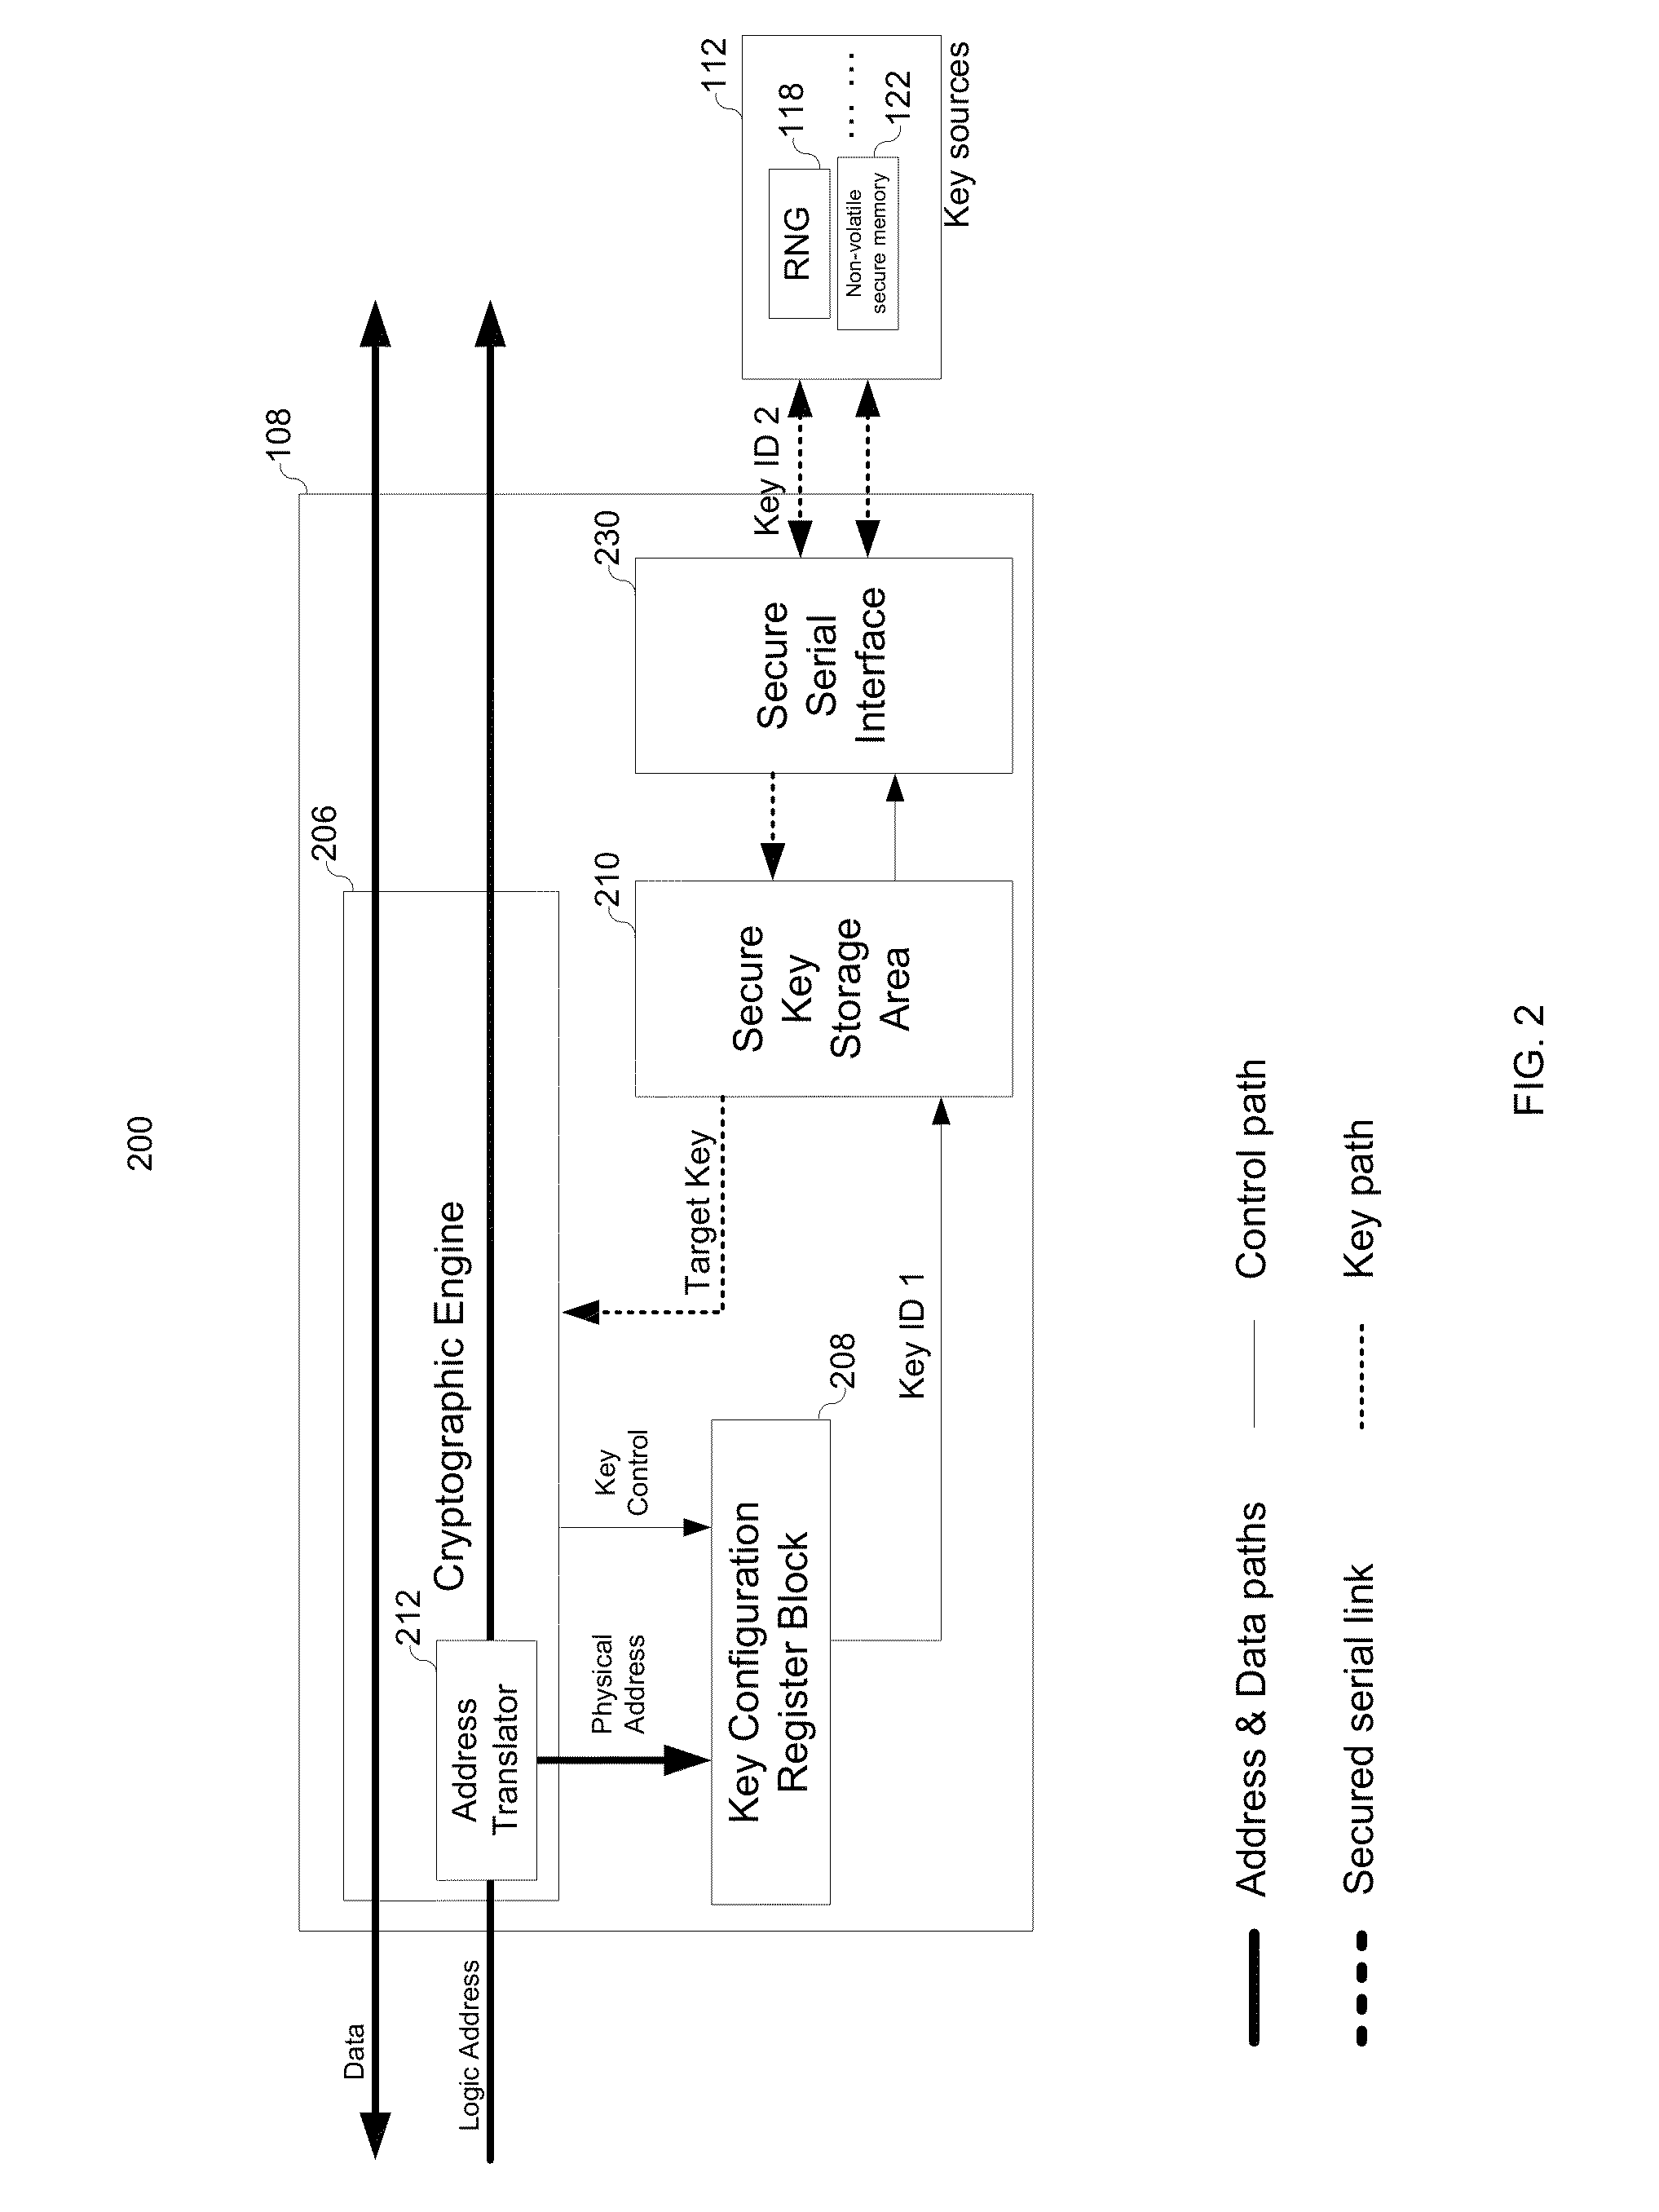 Systems and methods for managing cryptographic keys in a secure microcontroller